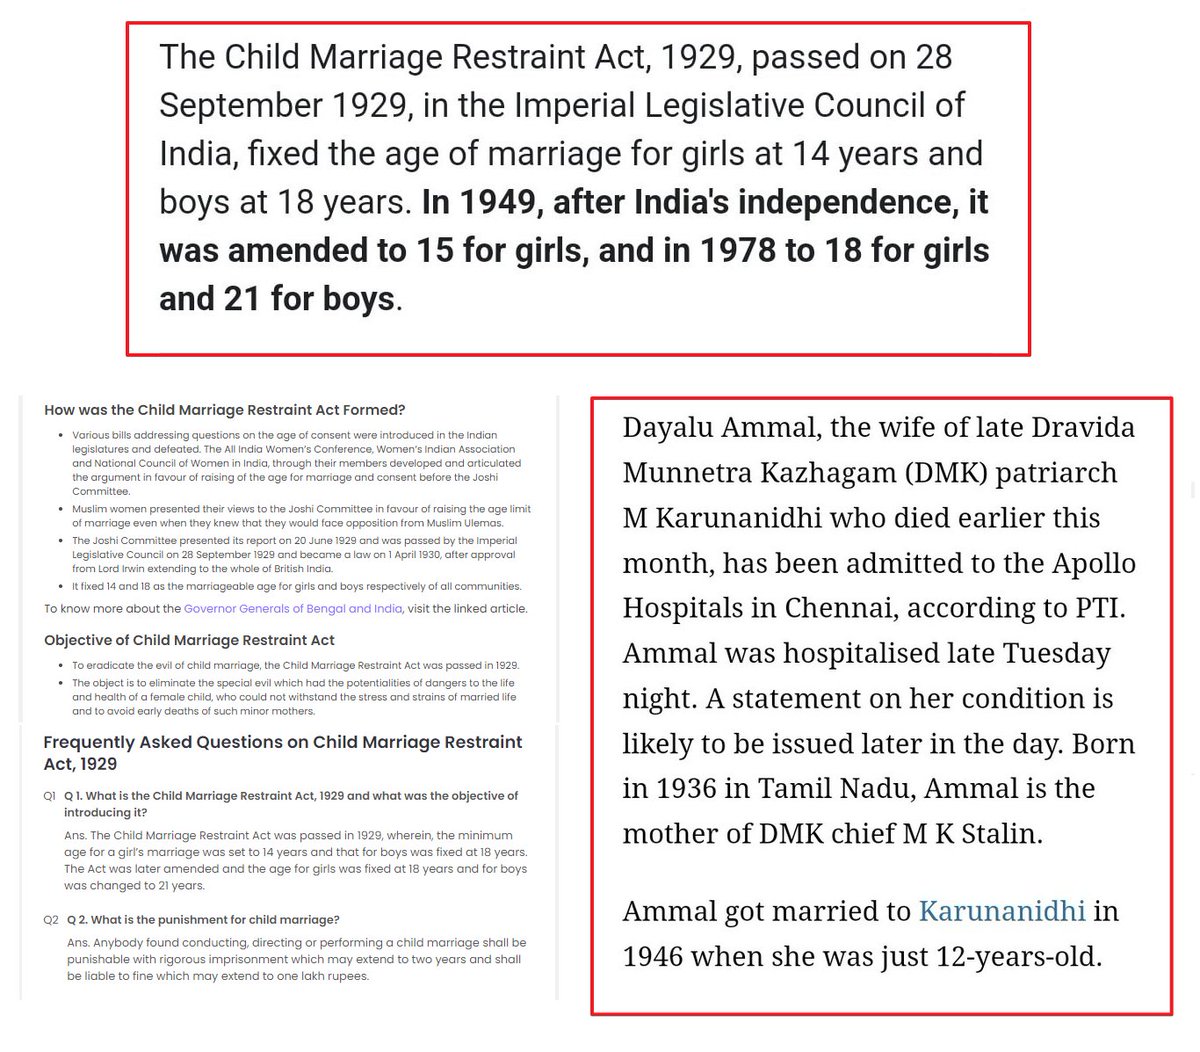 As per the Child Marriage Restraint Act,1929, passed on 28Sep-1929, marriage age for girls was later amended from 14 to 15yrs for girls &
to 18 yrs for girls  

This means late DMK Chief M.Karunanidhi marriage with Dayalu Ammal was also illegal?🤔
@Saattaidurai